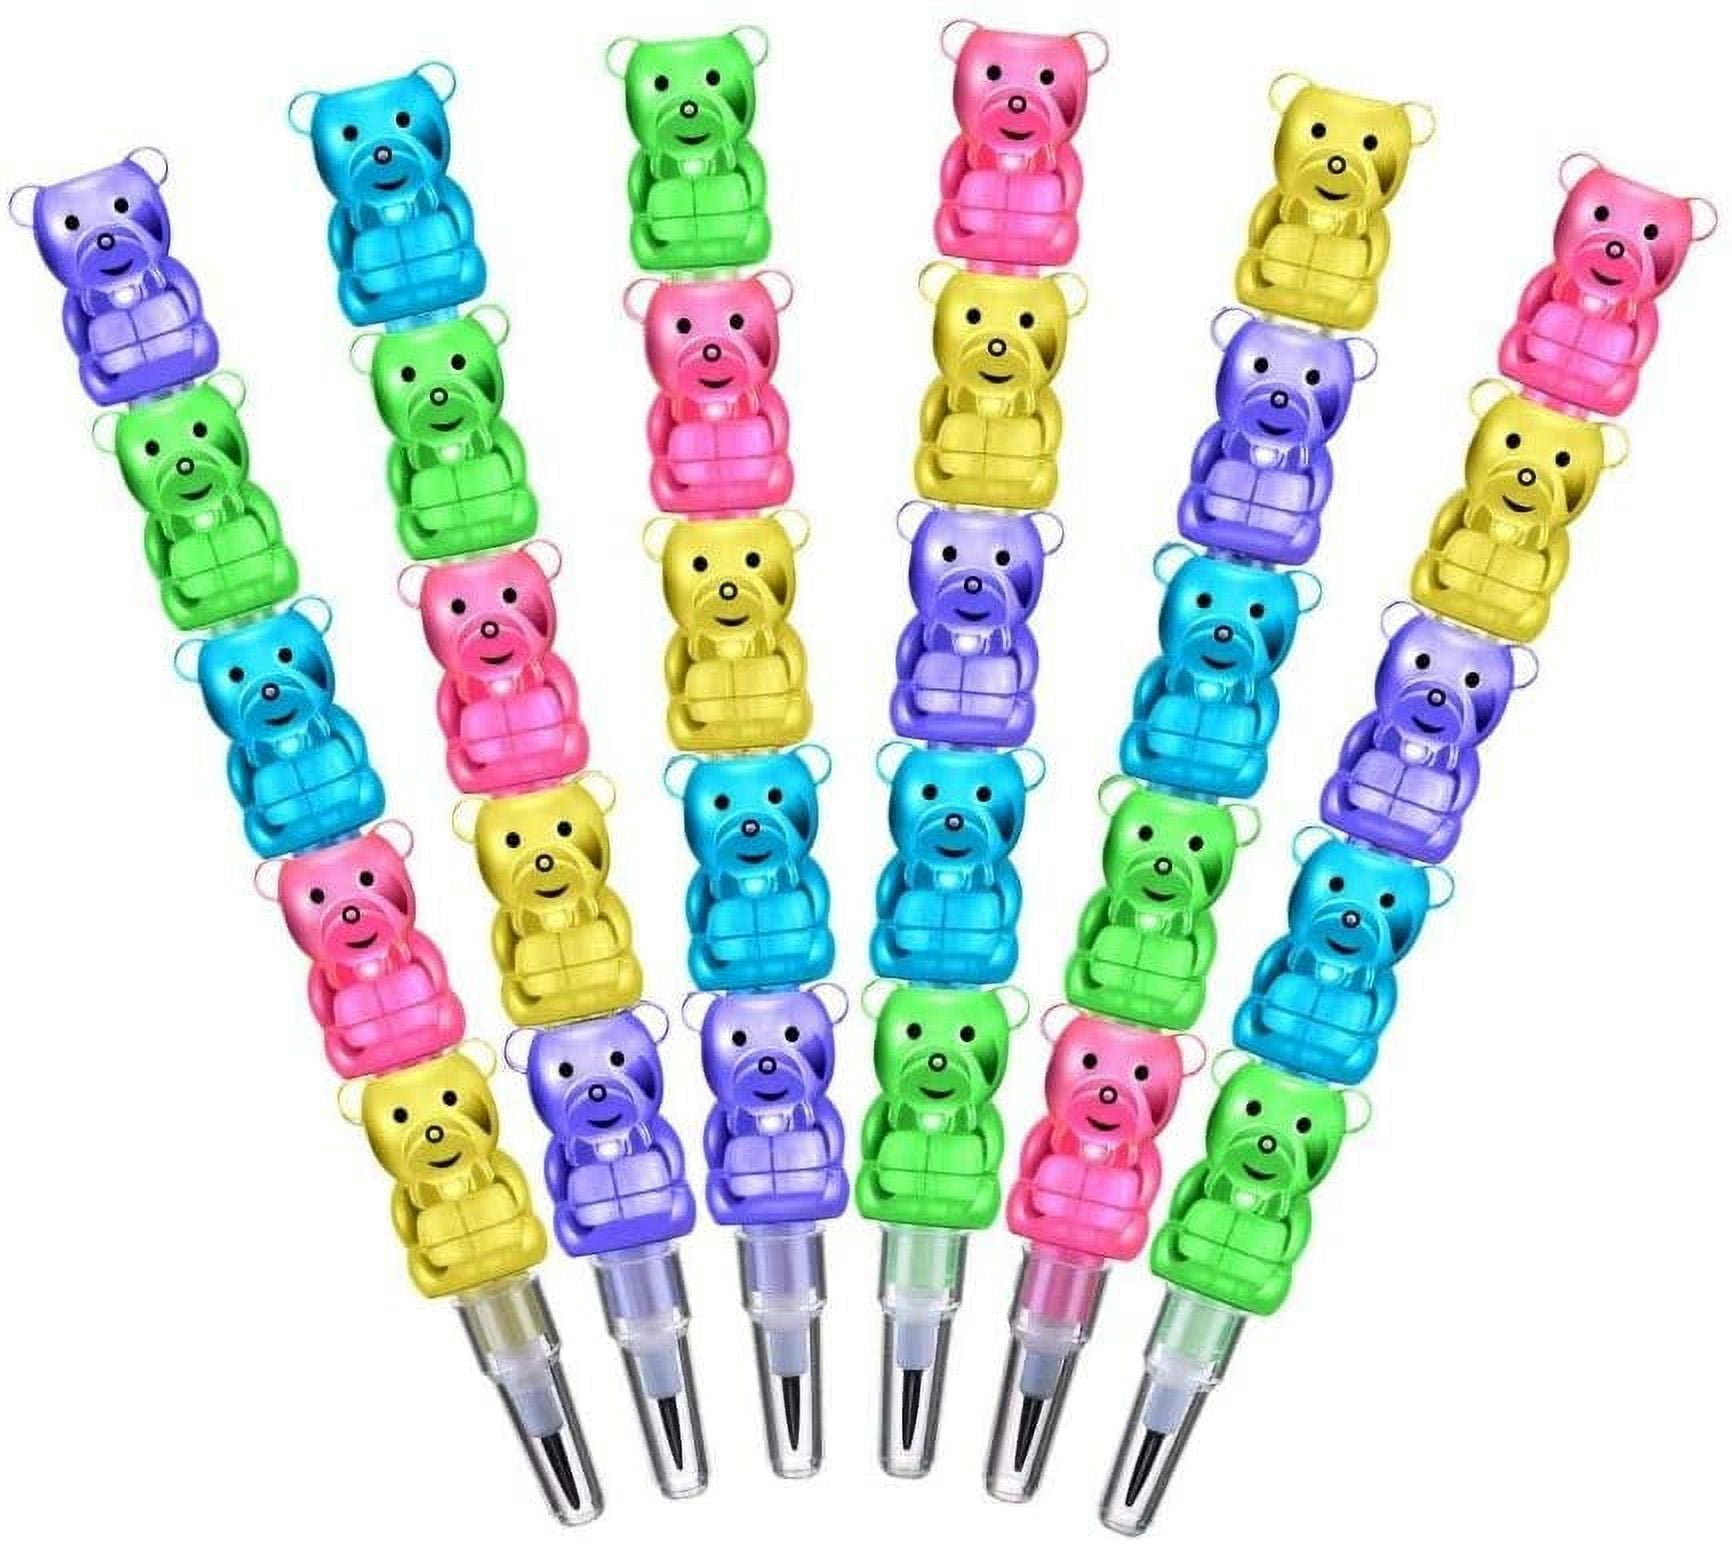  ibasenice 10pcs Cartoon Bear Pencil Stackable Colored Pencils  Plastic Pencils Bear Pencils Bulk Pencils for School Pencils Party Favors  for Kids Them Pencils Lead Handwriting Supplies Office : Toys & Games